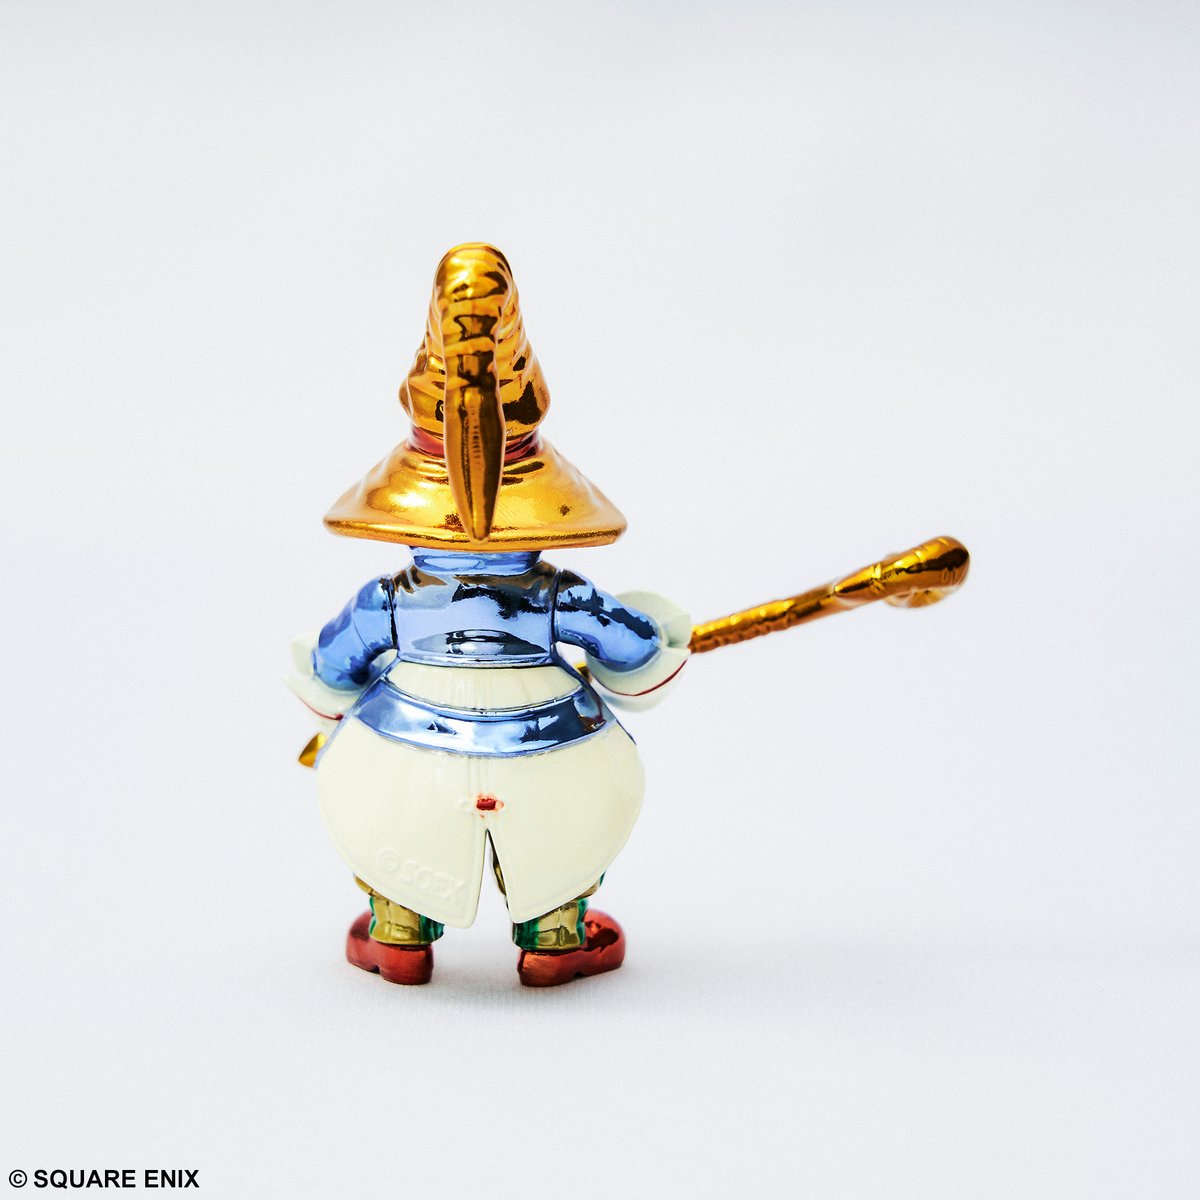 Vivi from FINAL FANTASY IX arrives as the newest addition to our BRIGHT ARTS GALLERY line! This colorful and detailed metallic figure is a cheerful addition to any fan's home. Pre-order here: sqex.link/grfc